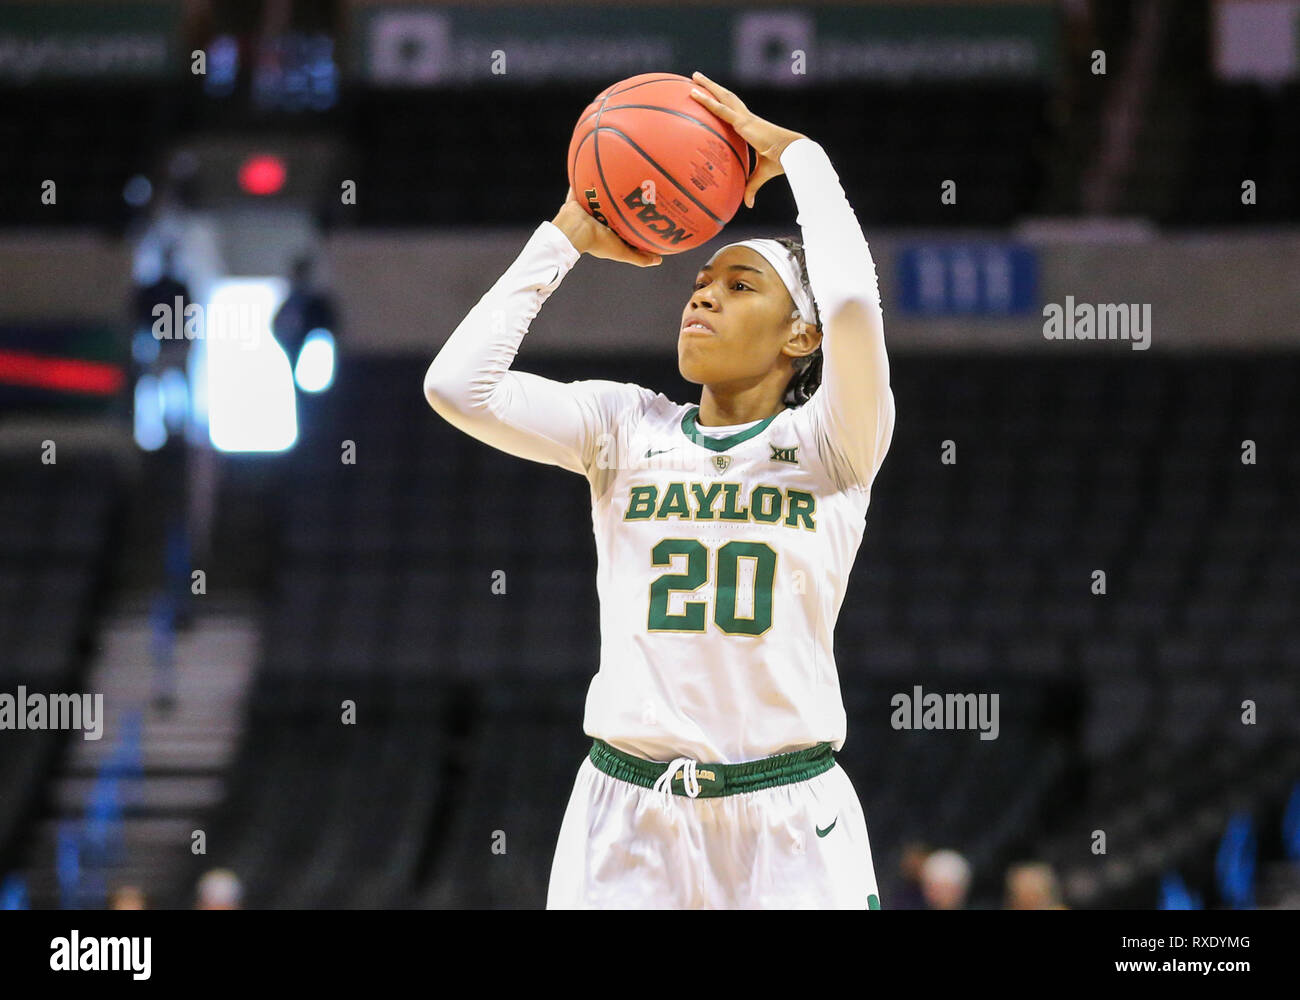 Oklahoma City, OK, USA. 9th Mar, 2019. Baylor Guard Juicy Landrum (20) attempts a shot during a Phillips 66 Big 12 Womens Basketball Championship quarterfinal game between the Baylor Lady Bears and the Texas Tech Lady Raiders at Chesapeake Energy Arena in Oklahoma City, OK. Gray Siegel/CSM/Alamy Live News Stock Photo